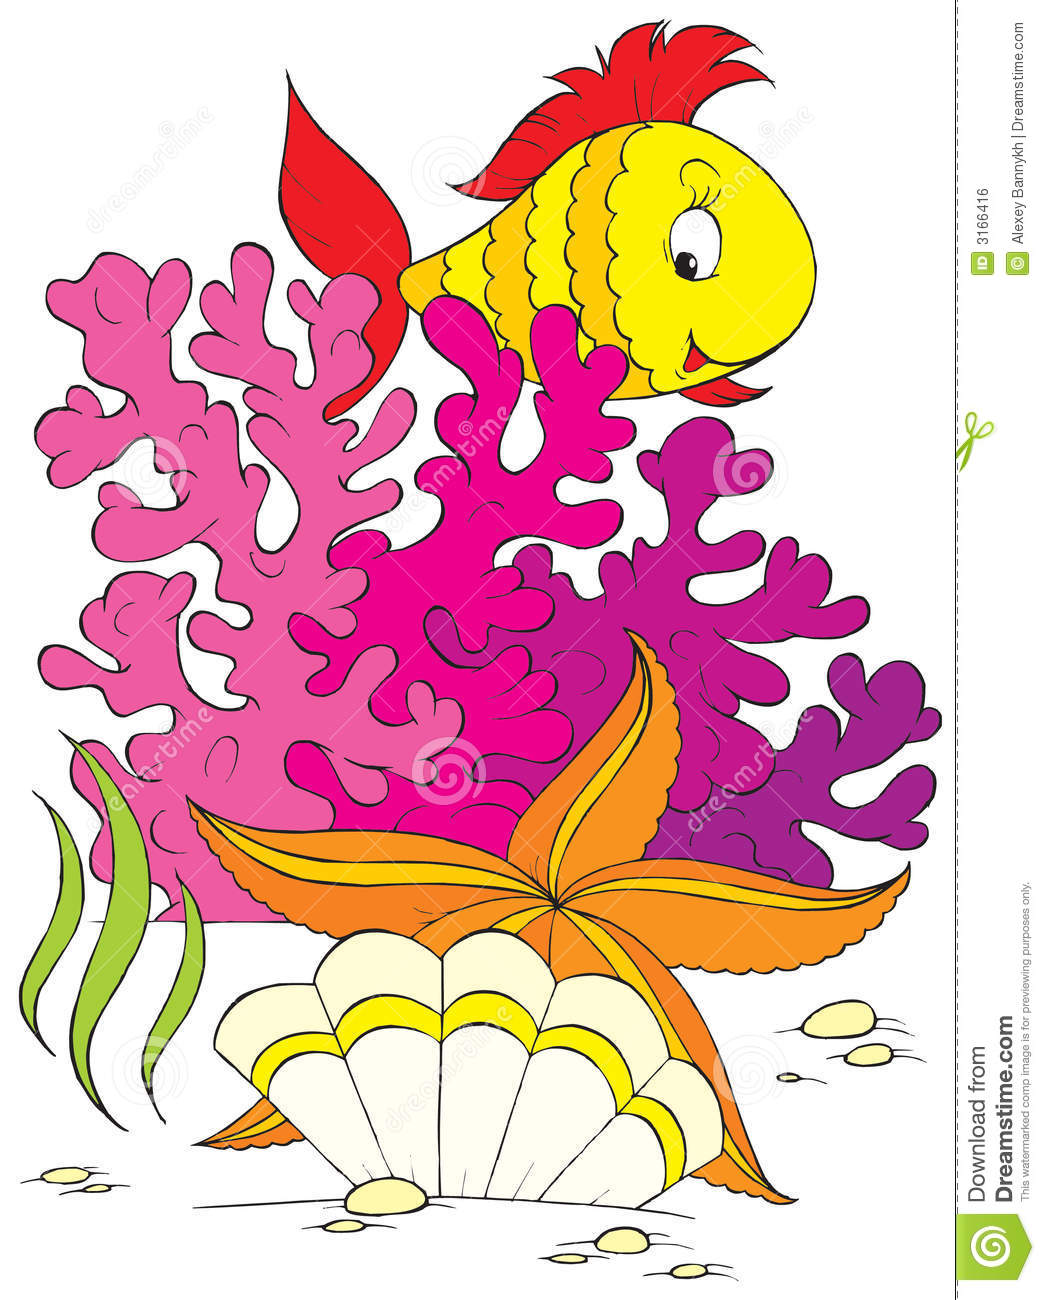 Coral reef clipart free » Clipart Station.